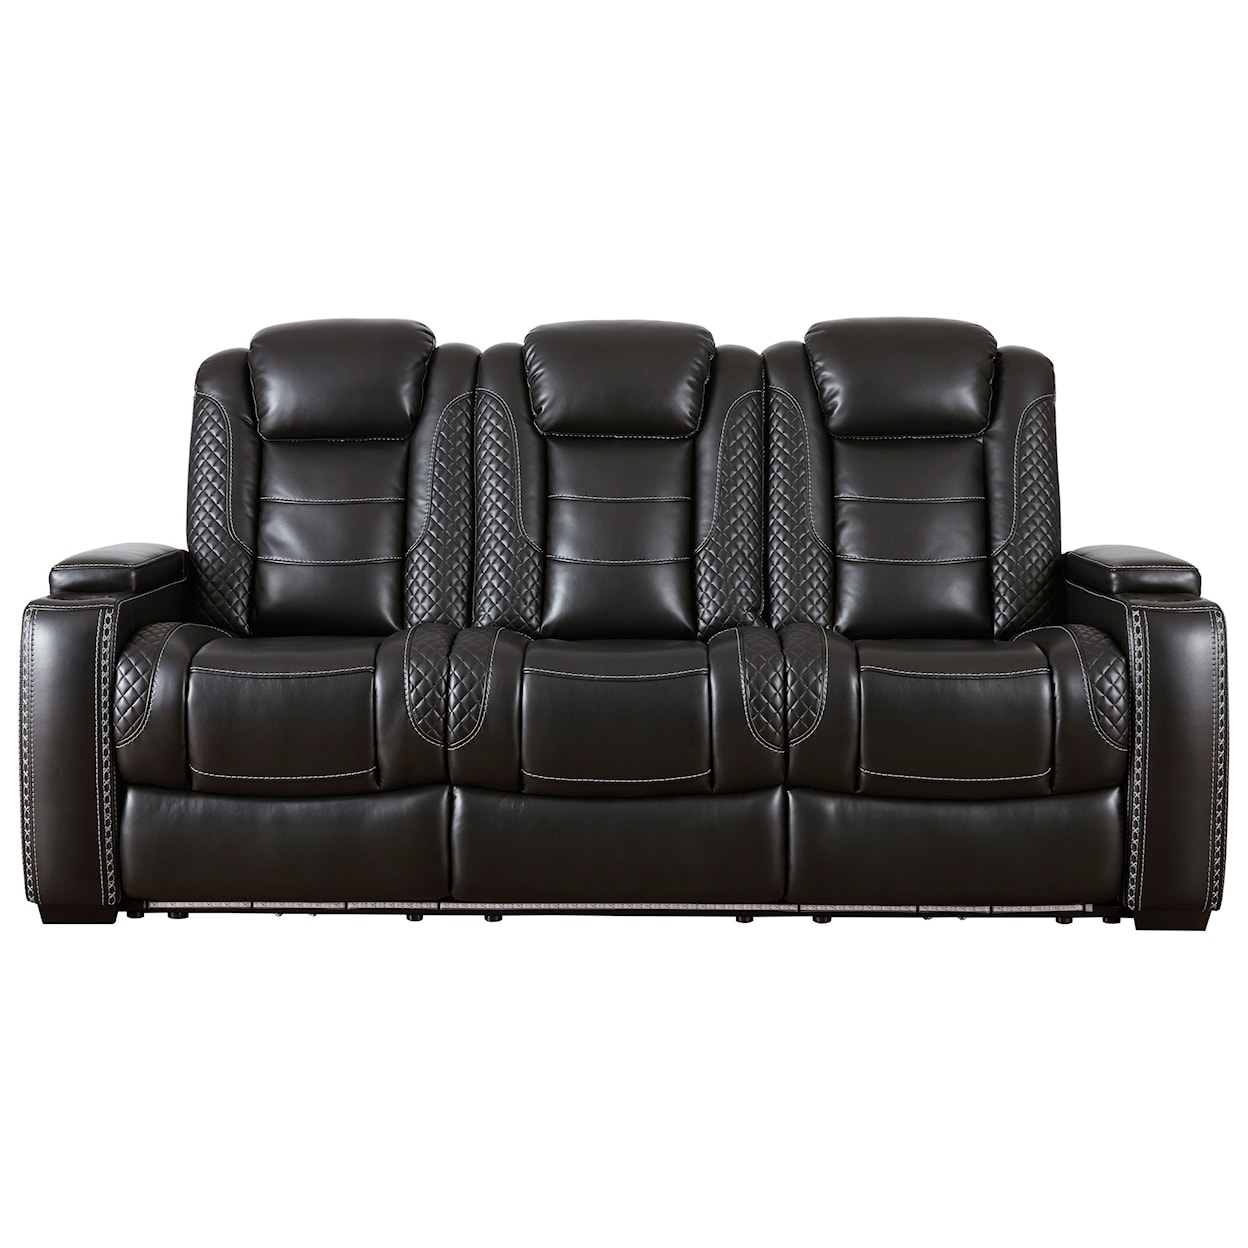 Signature Design by Ashley Furniture Party Time Power Reclining Sofa w/ Adjustable Headrests